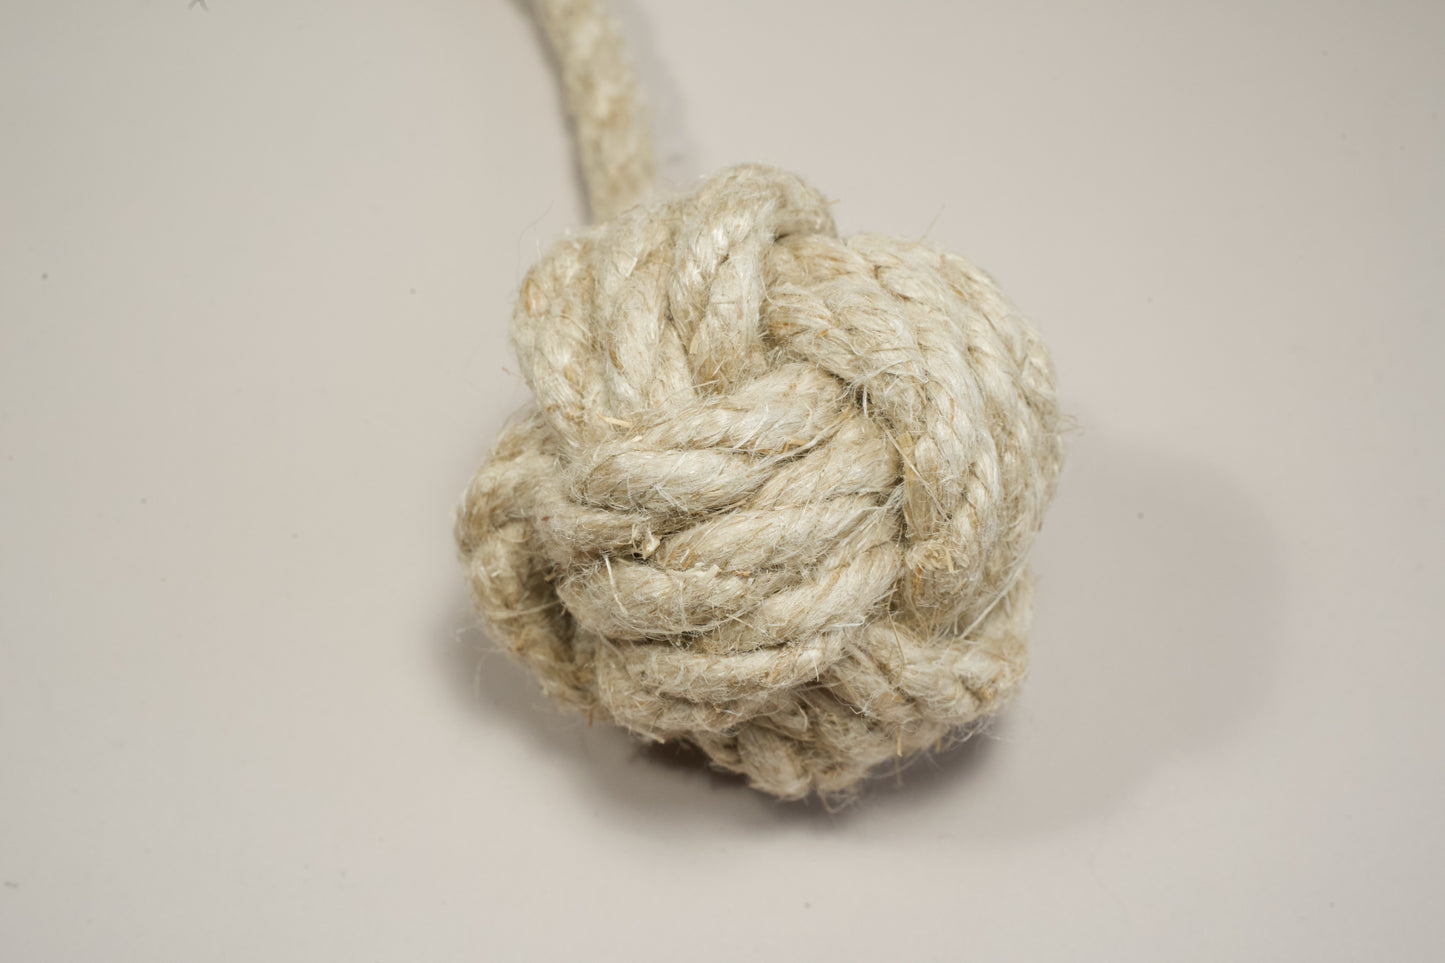 Close-up view of hemp fibers from the tip of the dog toy.